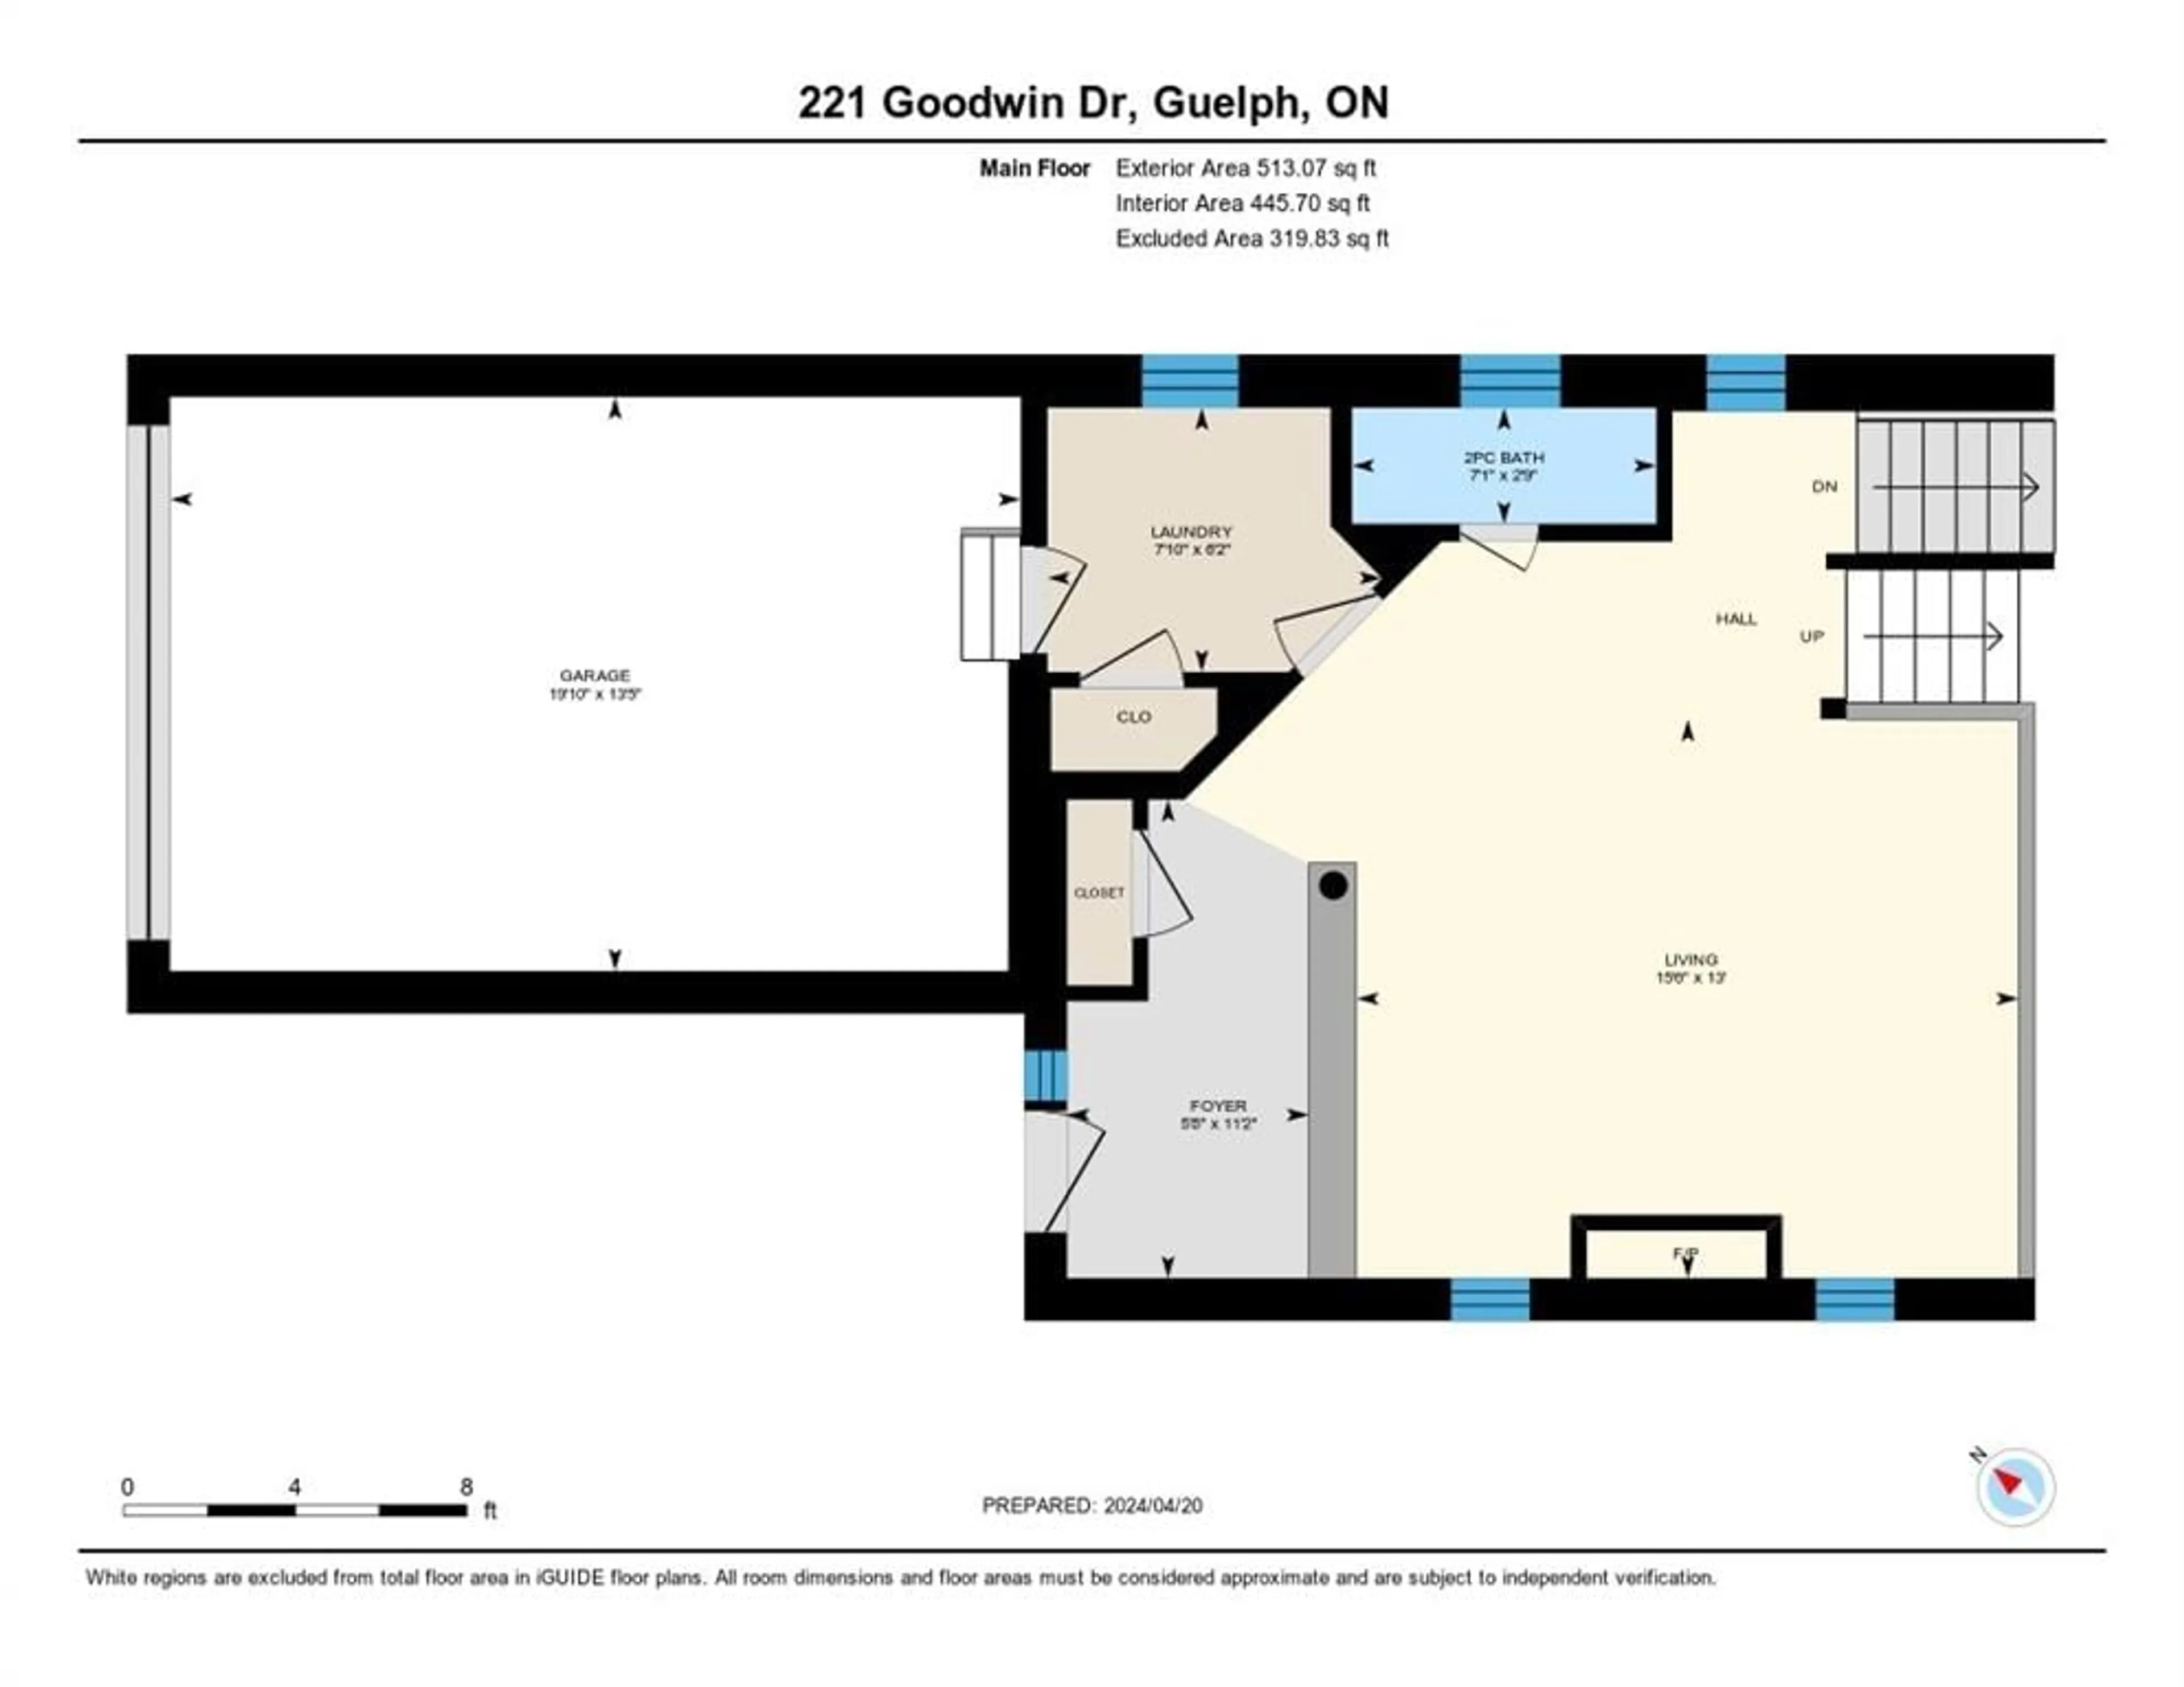 Floor plan for 221 Goodwin Drive, Guelph Ontario N1L 0K1